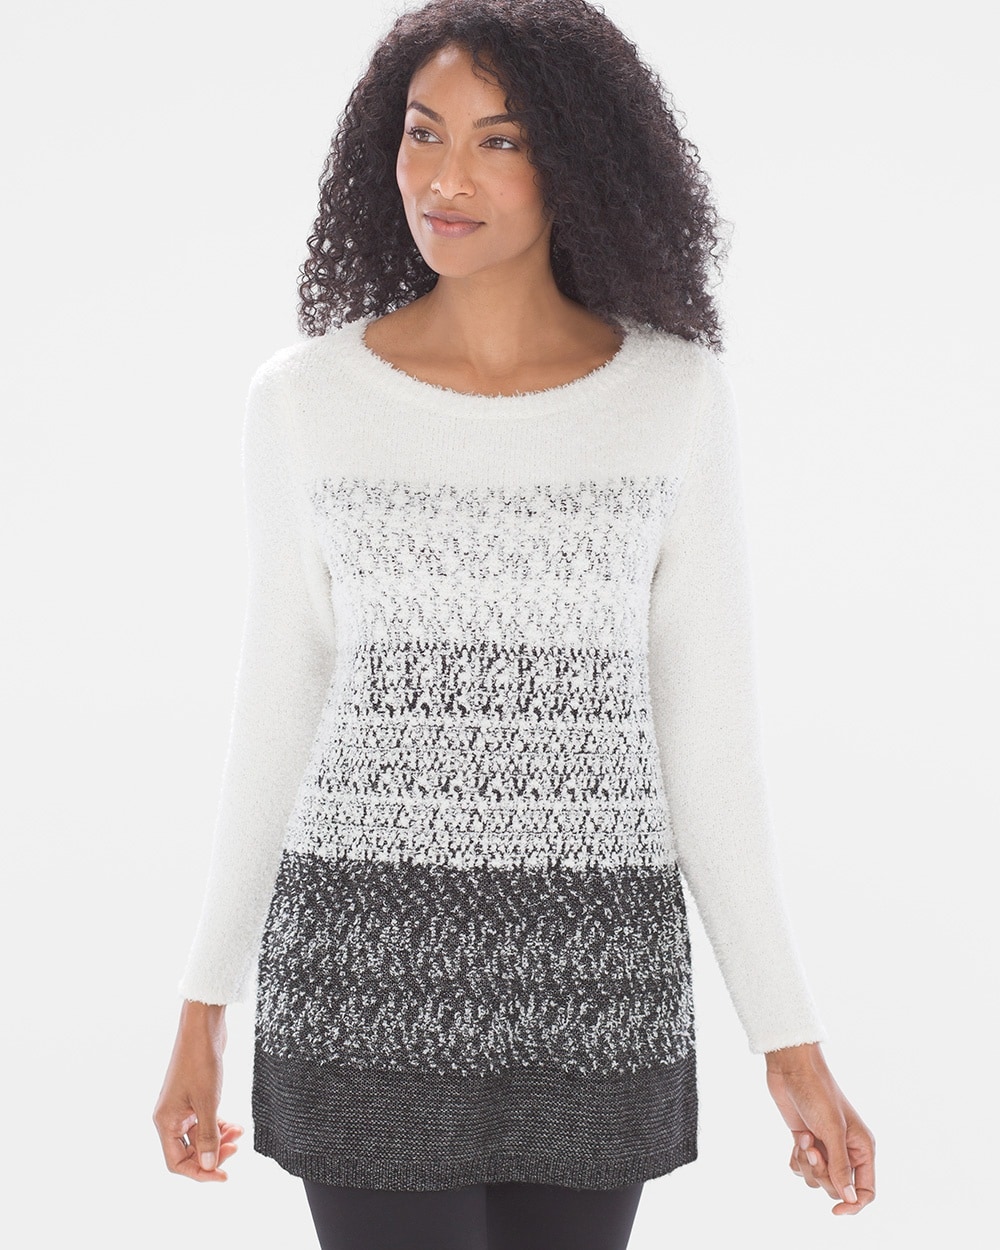 Textured Knit Pullover White/Black